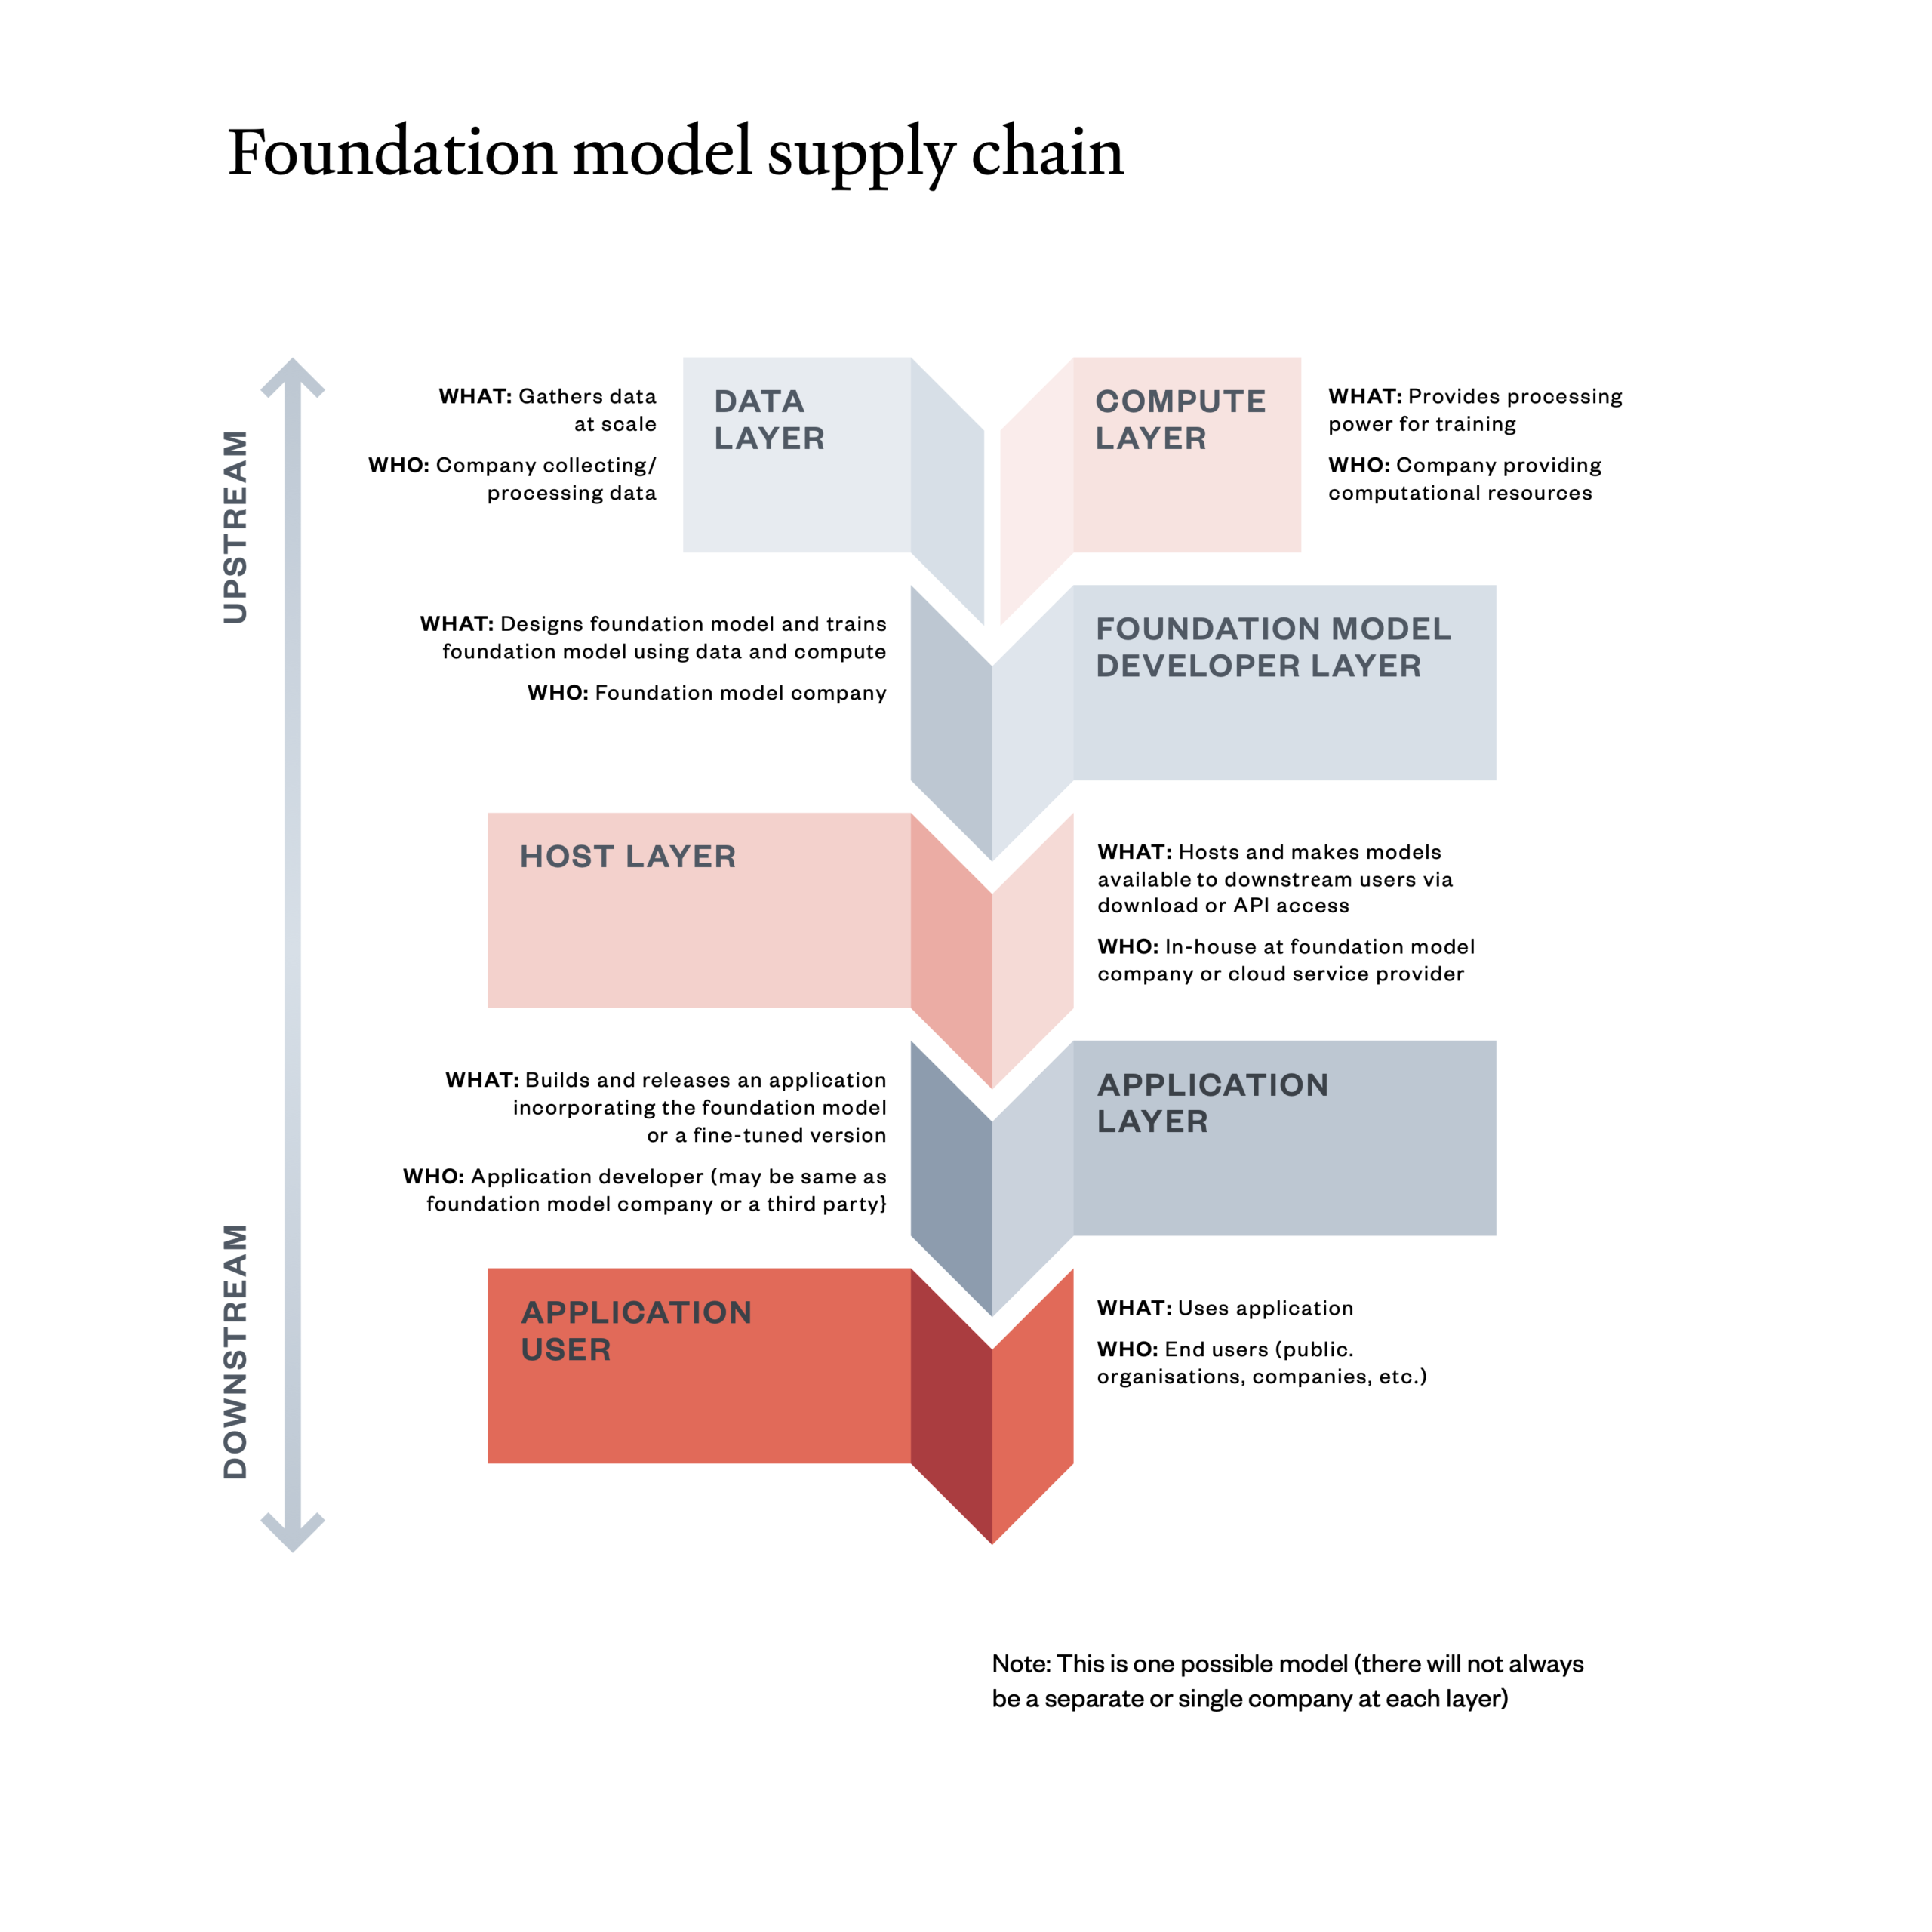 Foundation model supply chain DATA LAYER WHAT: Gathers data at scale WHO: Company collecting / processing data COMPUTE LAYER WHAT: Provides processing power for training WHO: Company providing computational resources FOUNDATION MODEL DEVELOPER LAYER WHAT: Designs foundation model and trains foundation model using data and compute WHO: Foundation model company HOST LAYER WHAT: Hosts and makes models available to downstram users via download or API access WHO: In-house at foundation model company or cloud service provider APPLICATION LAYER WHAT: Builds and releases an application incorporating the foundation model or a fine-tuned version WHO: Application developer (may be same as foundation model company or a third party} APPLICATION USER WHAT: Uses application WHO: End users (public. organisations, companies, etc.) Note: This is one possible model (there will not always be a separate or single company at each layer)